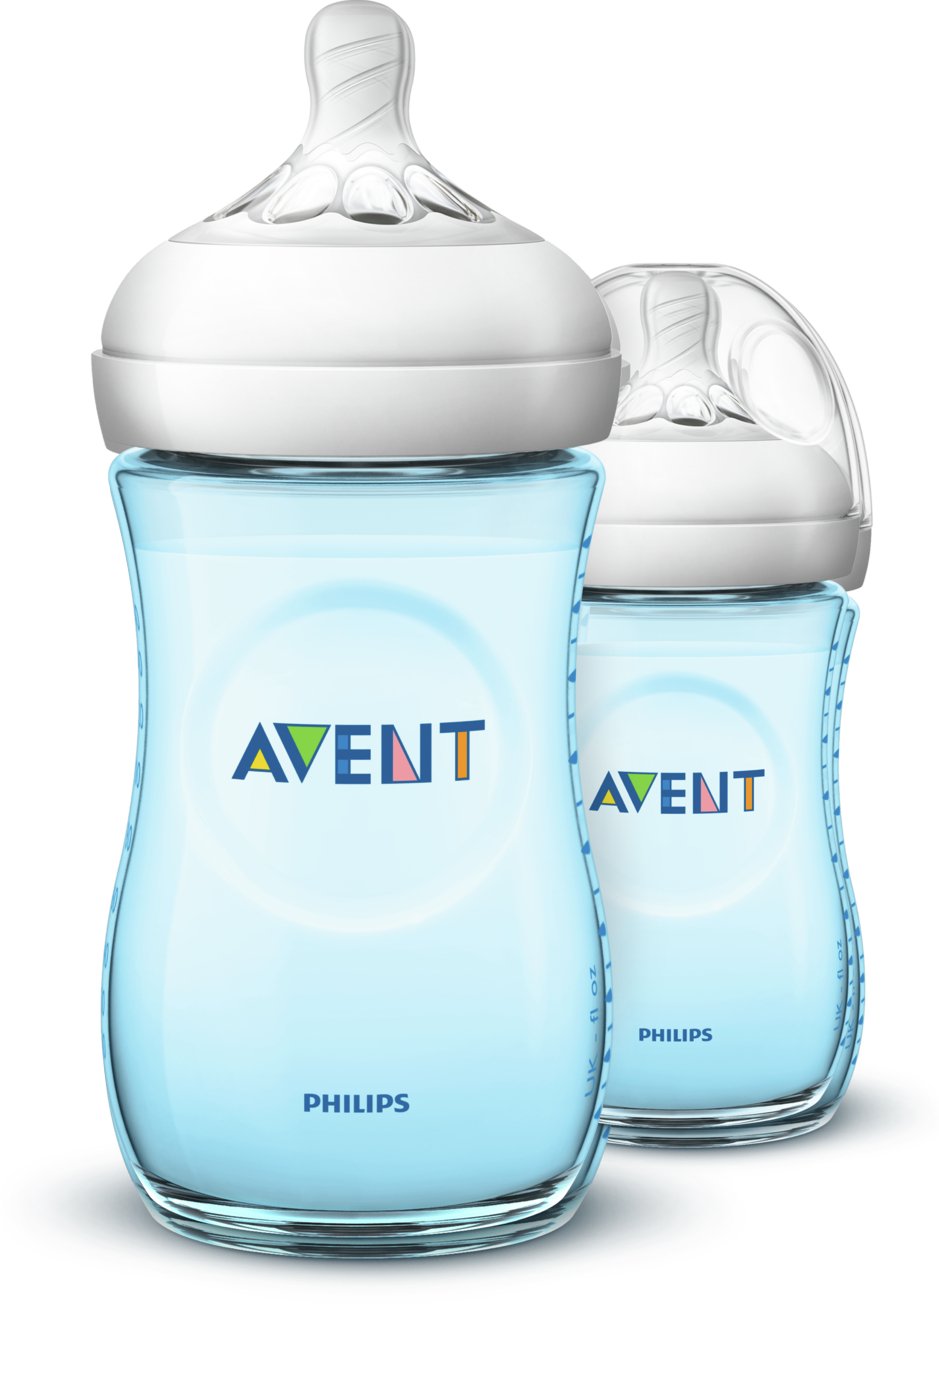 Philips Avent Natural Bottle 9oz 1month+ - 2 pack